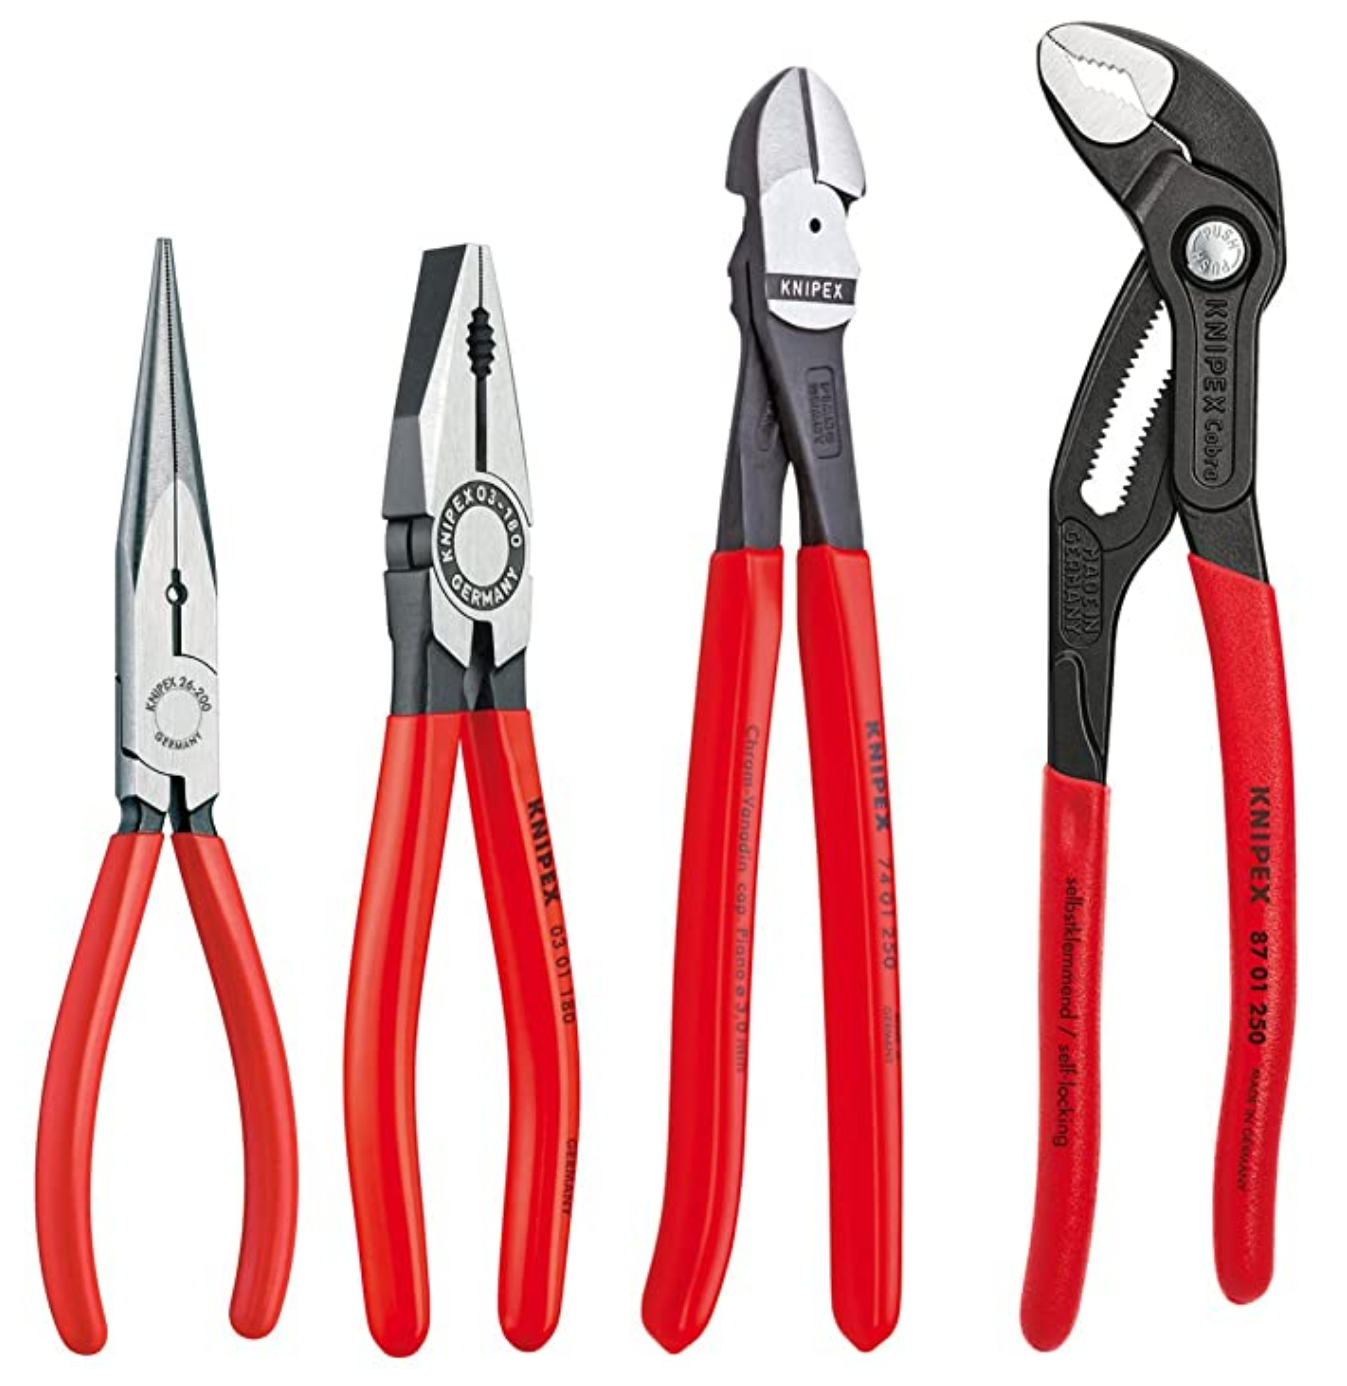 KNIPEX Tools 9K 00 80 94 US Cobra Combination Cutter and Needle Nose Pliers 4-Piece Set 